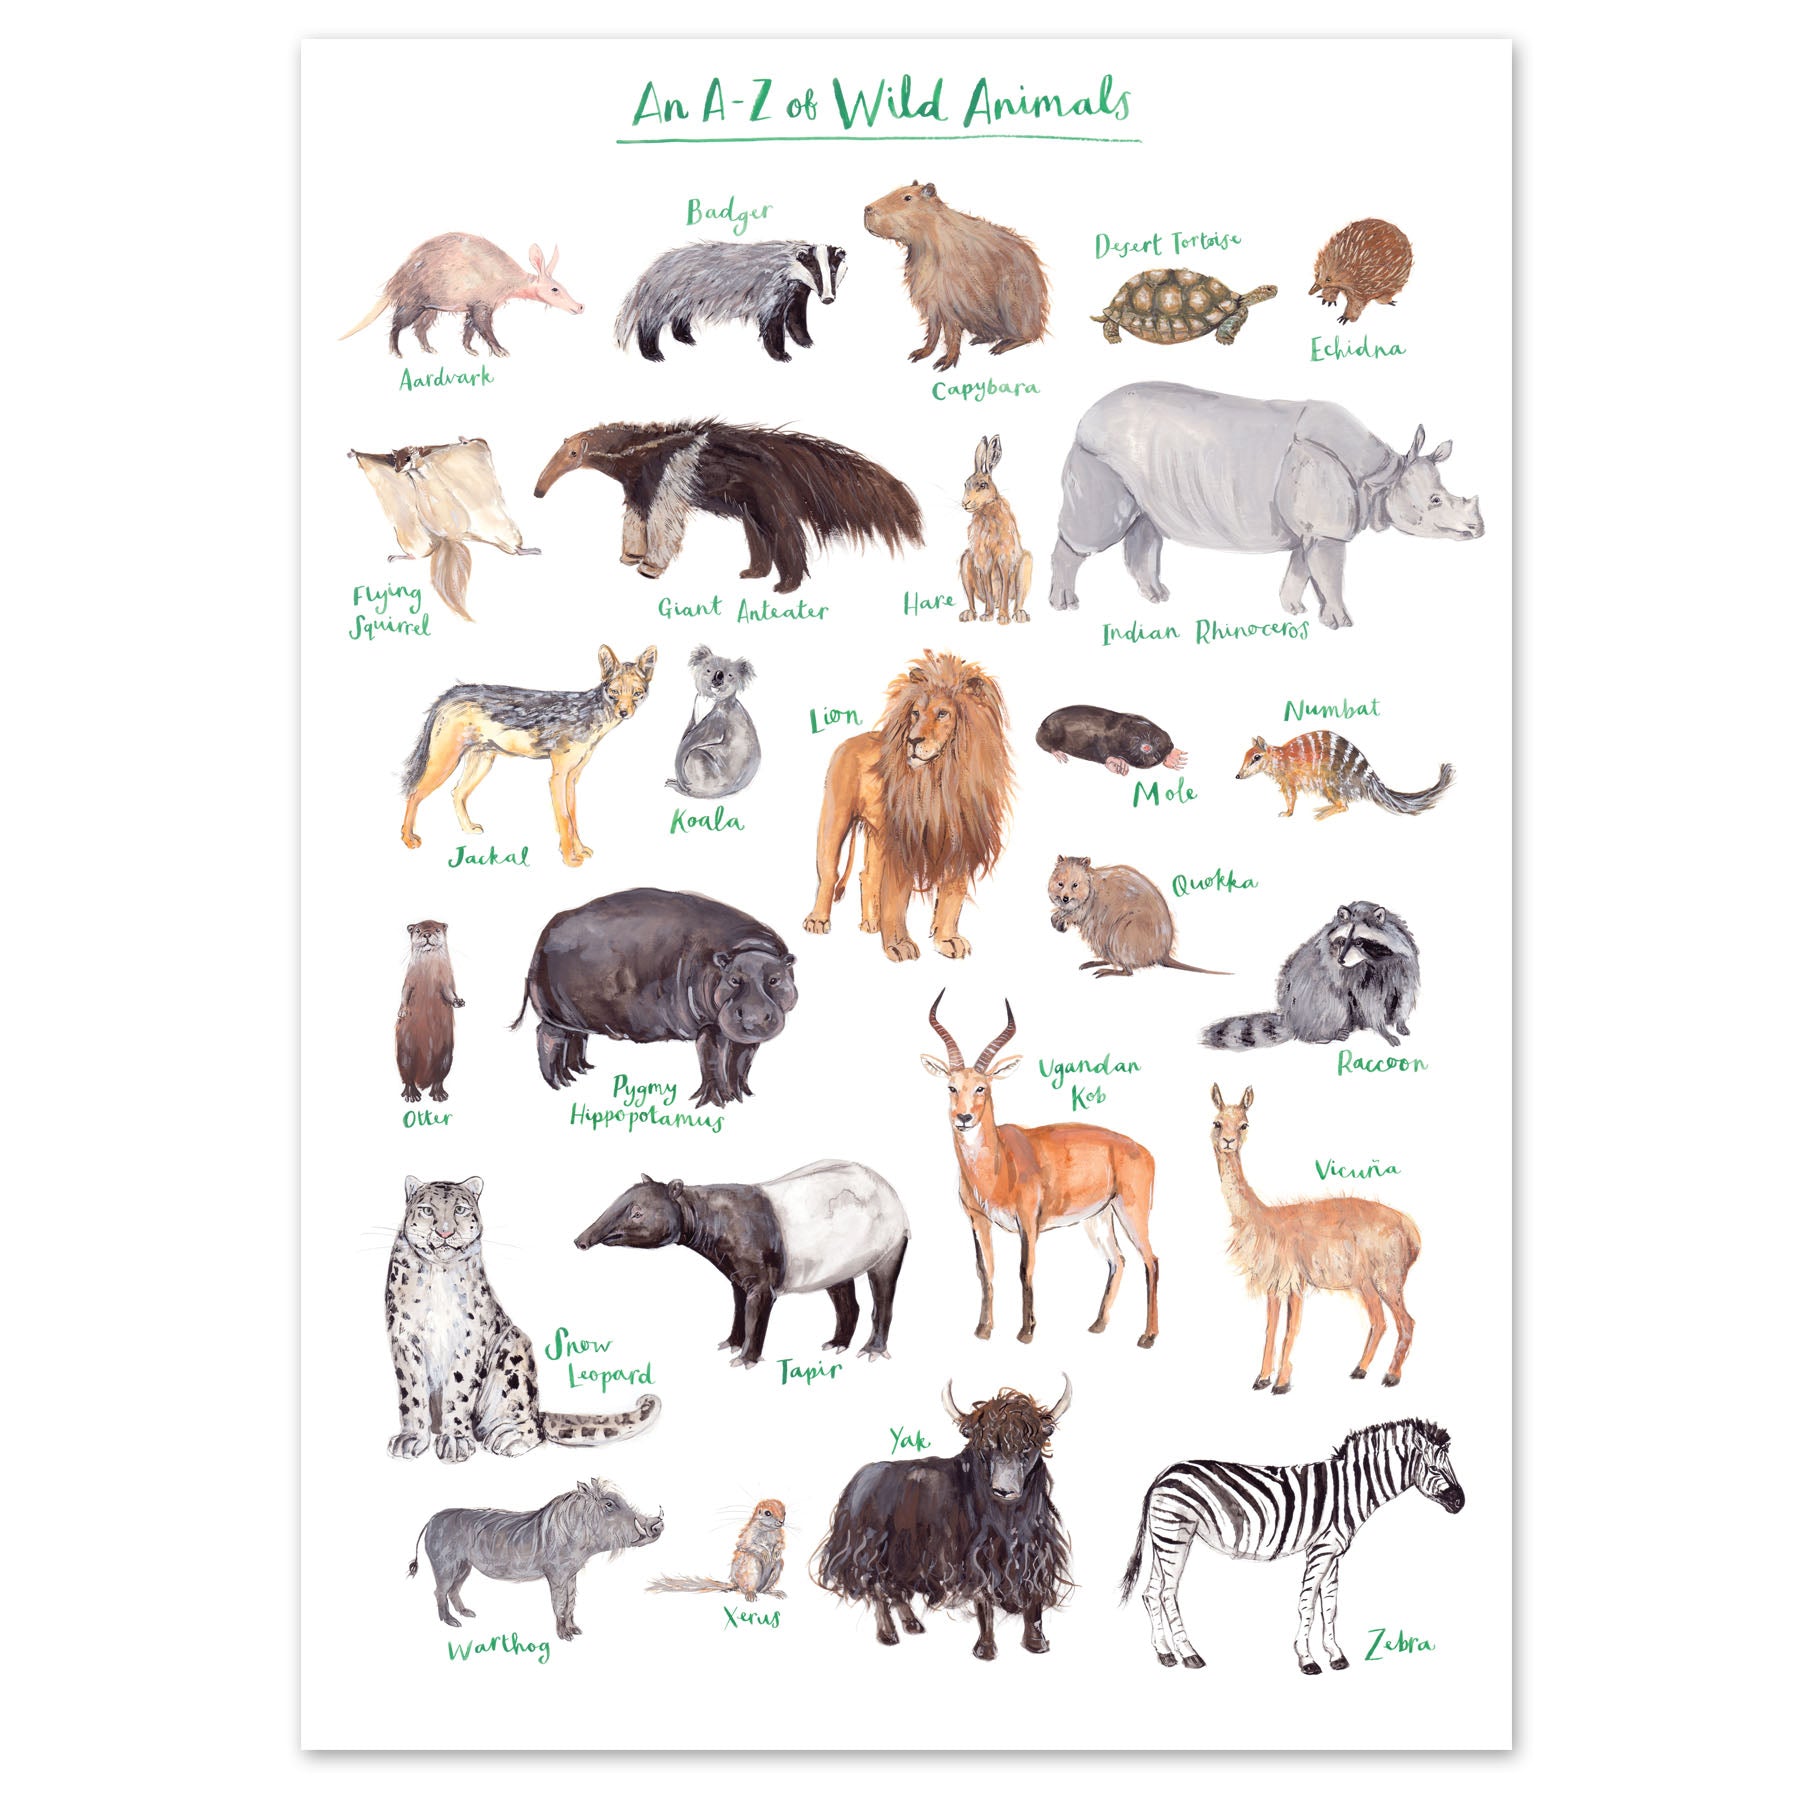 A3 A to Z of Wild Animals Art Print by Fiona Purves | Curiouser